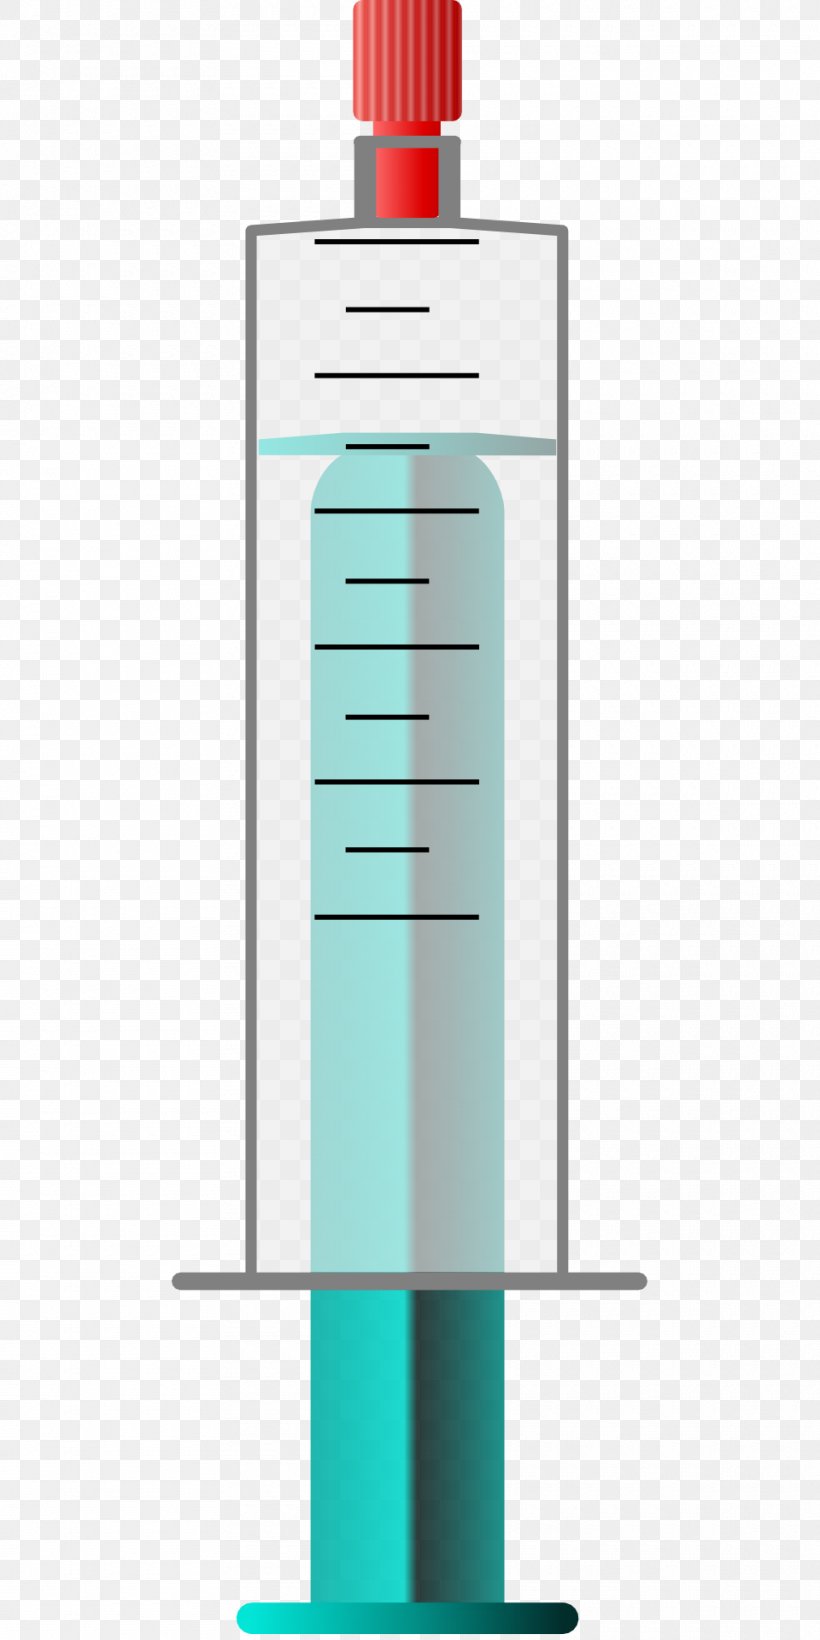 Injection Syringe Hypodermic Needle Luer Taper Clip Art, PNG, 960x1920px, Injection, Cylinder, Disease, Drawing, Hypodermic Needle Download Free